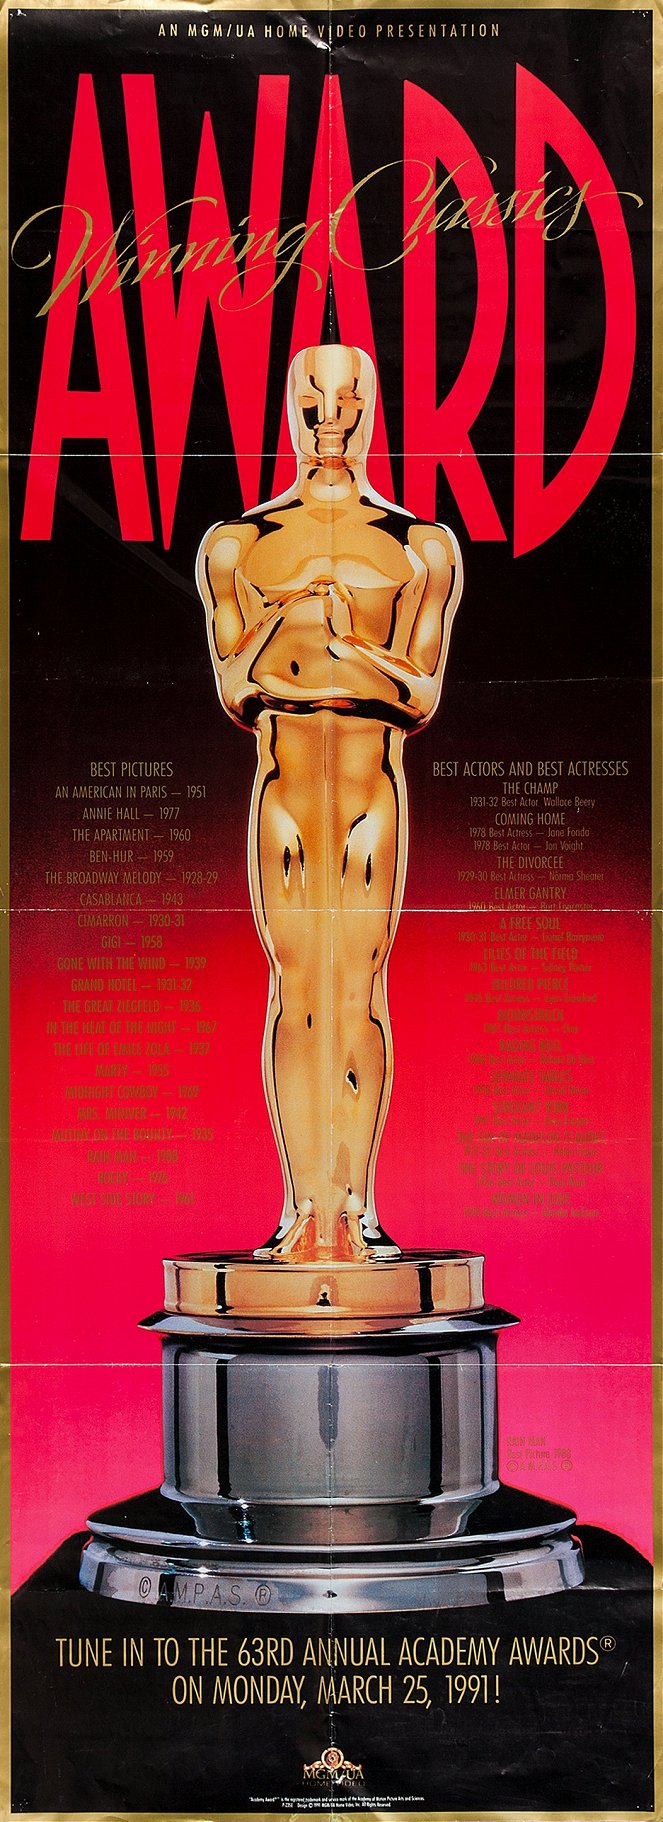 The 63rd Annual Academy Awards - Posters